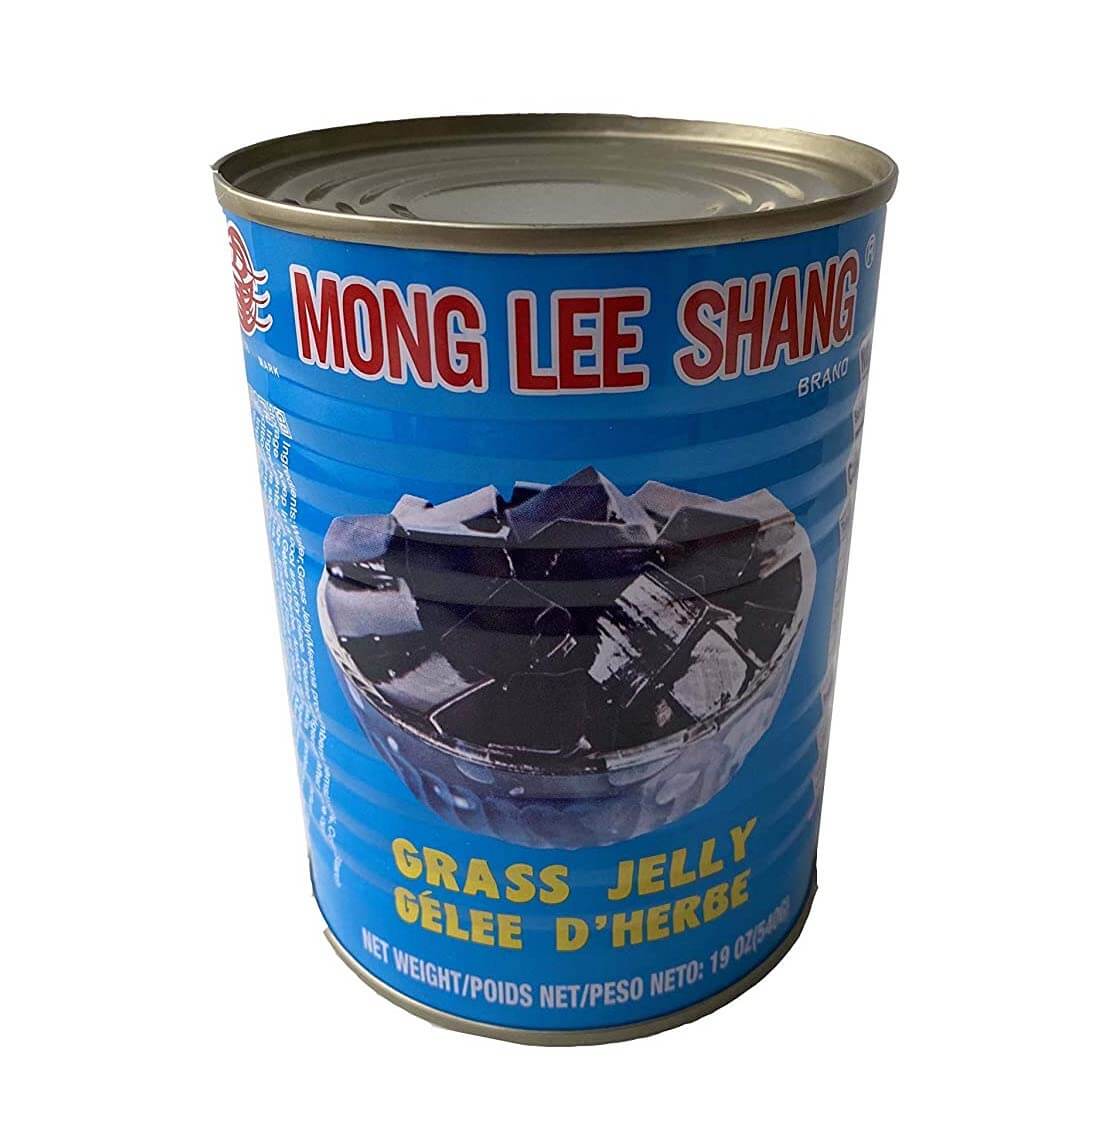 Mong Lee Shang Grass Jelly